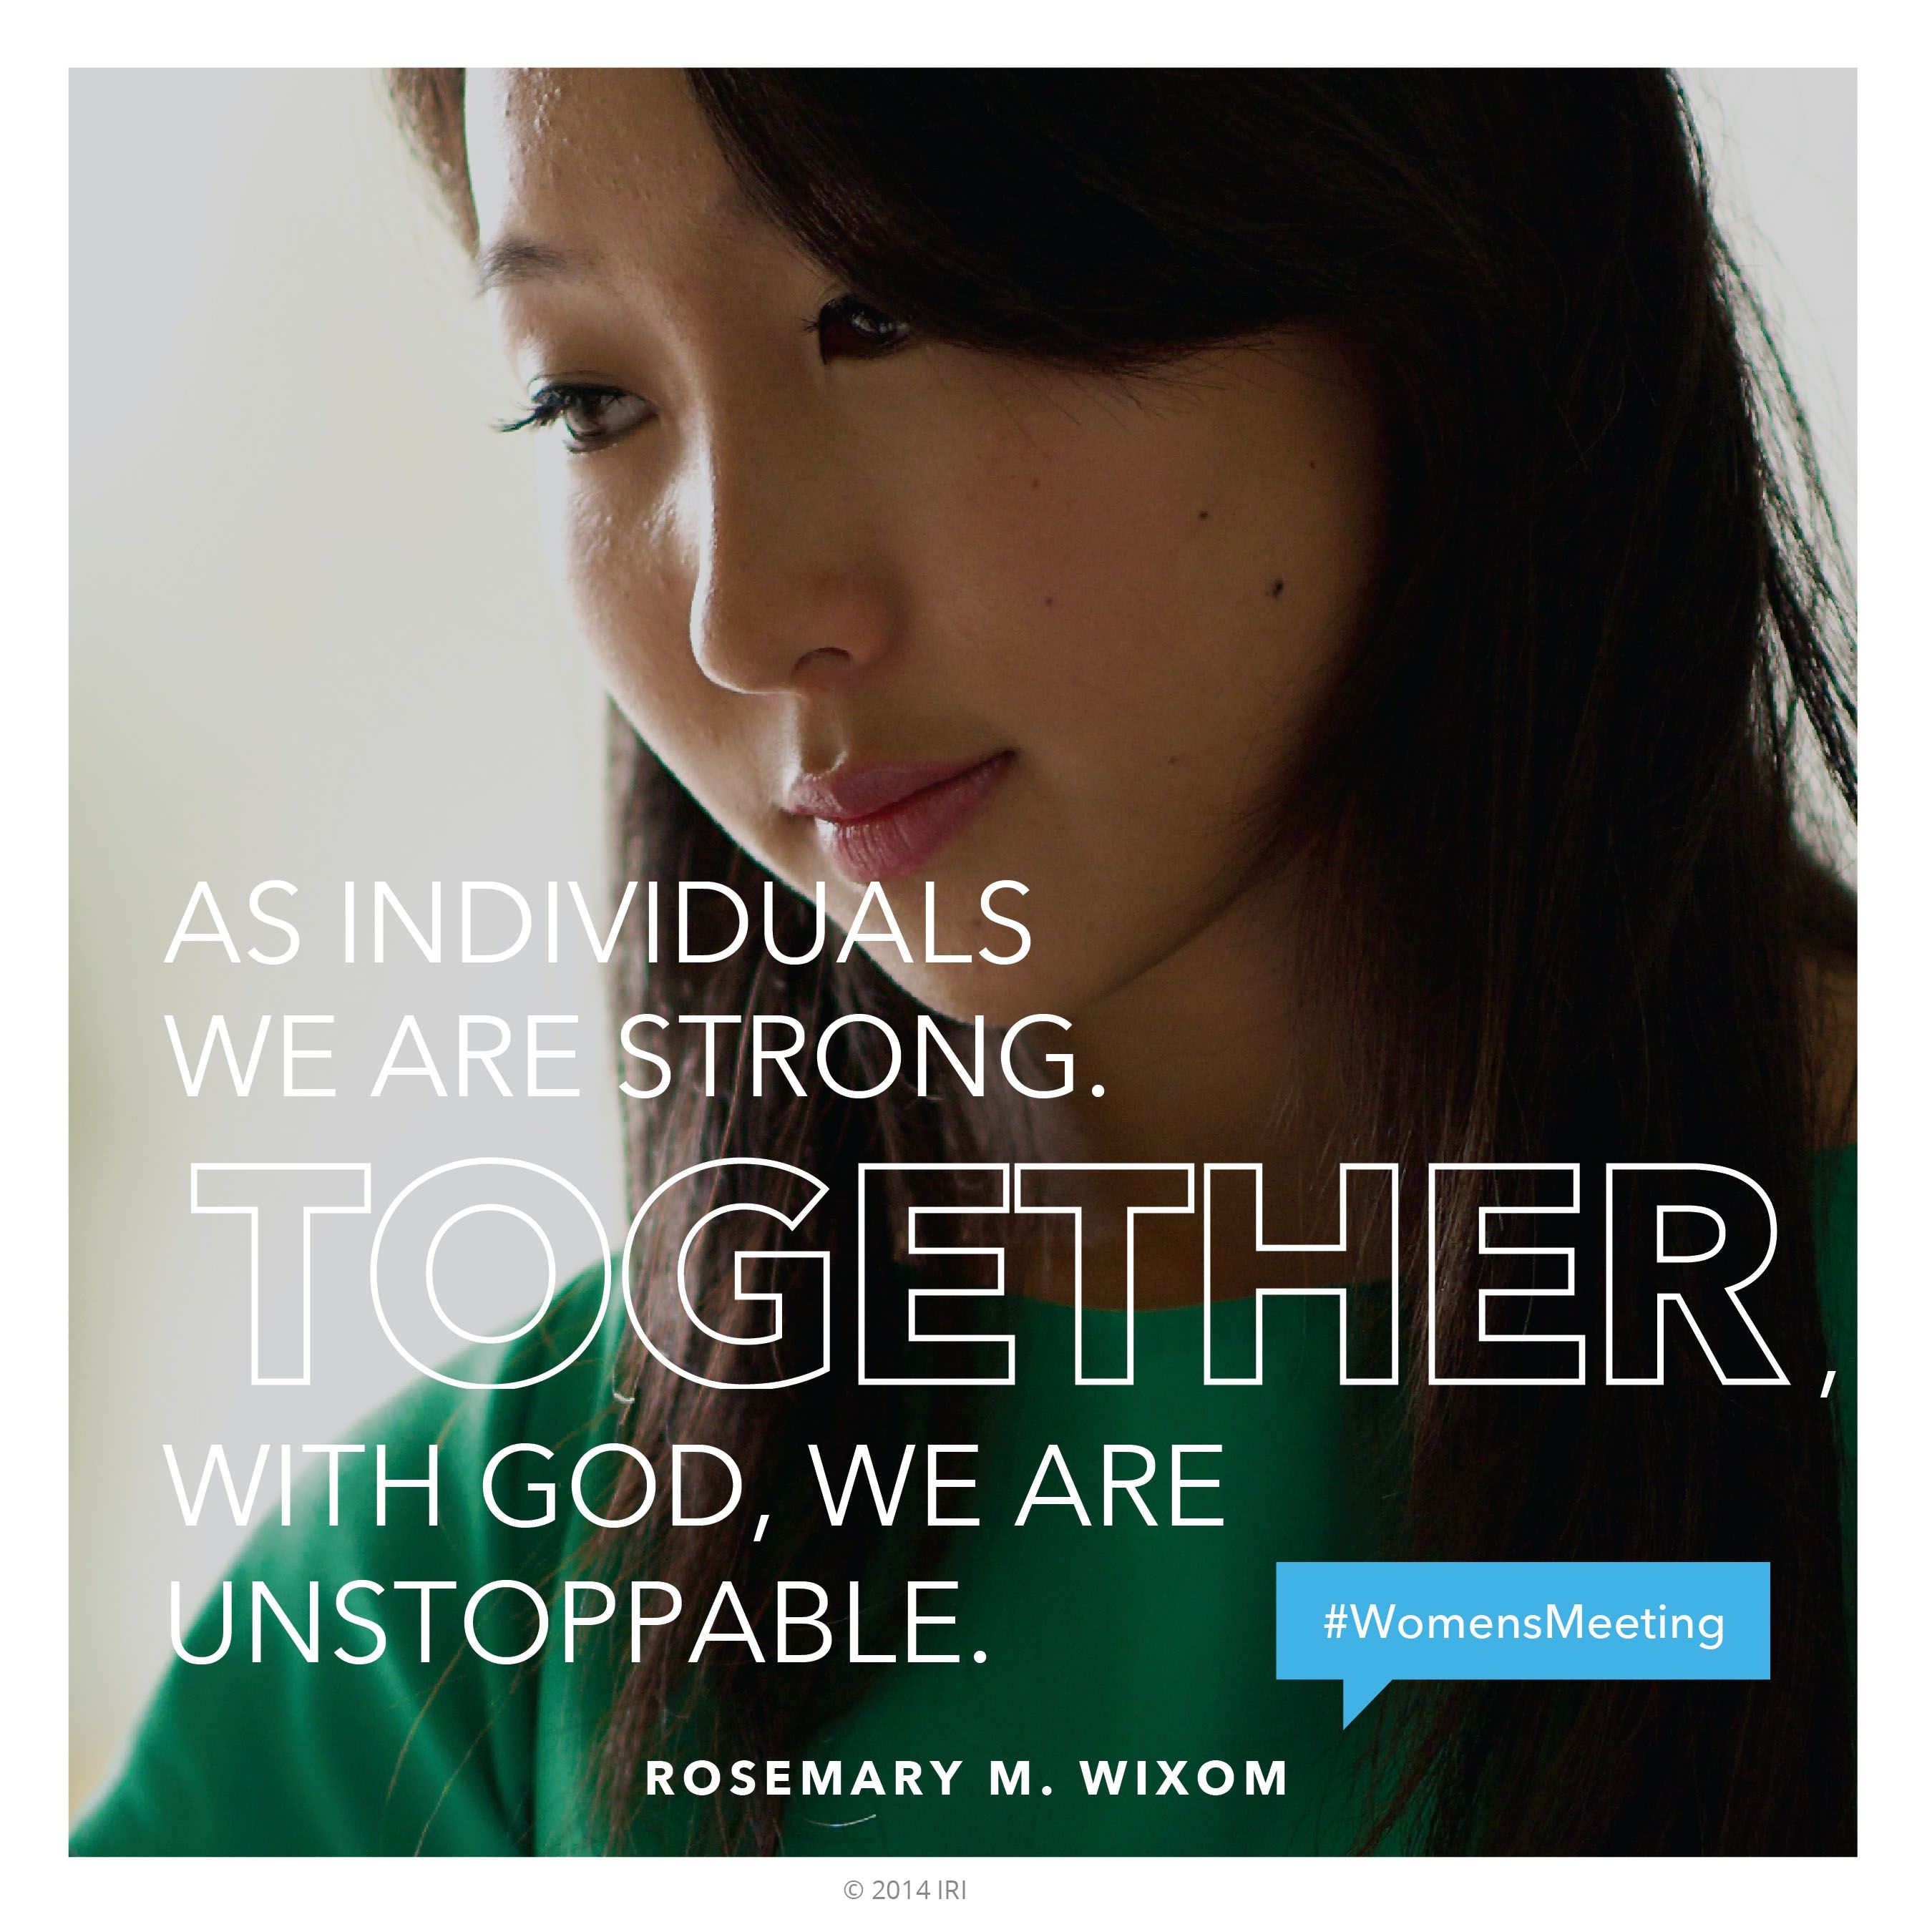 “As individuals we are strong. Together, with God, we are unstoppable.”—Sister Rosemary M. Wixom, “Keeping Covenants Protects Us, Prepares Us, and Empowers Us”